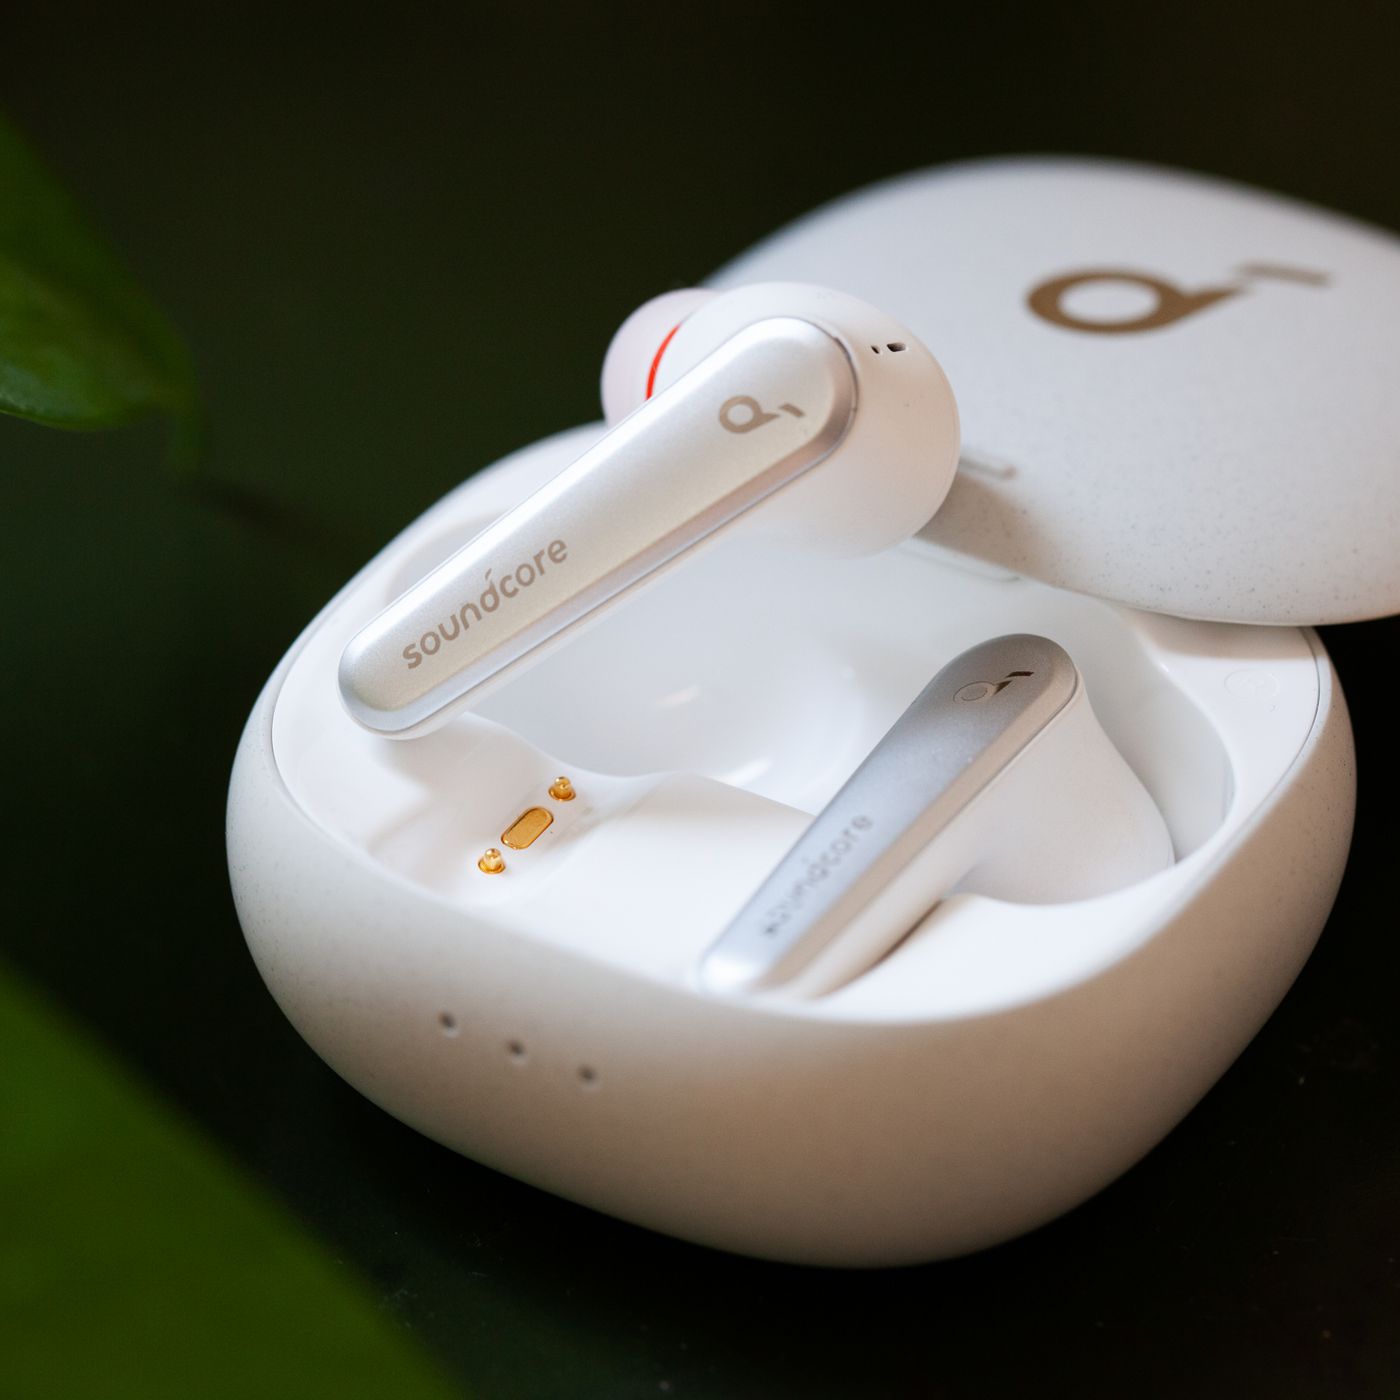 Anker Liberty Air 2 Pro review: $130 ANC earbuds worth listening